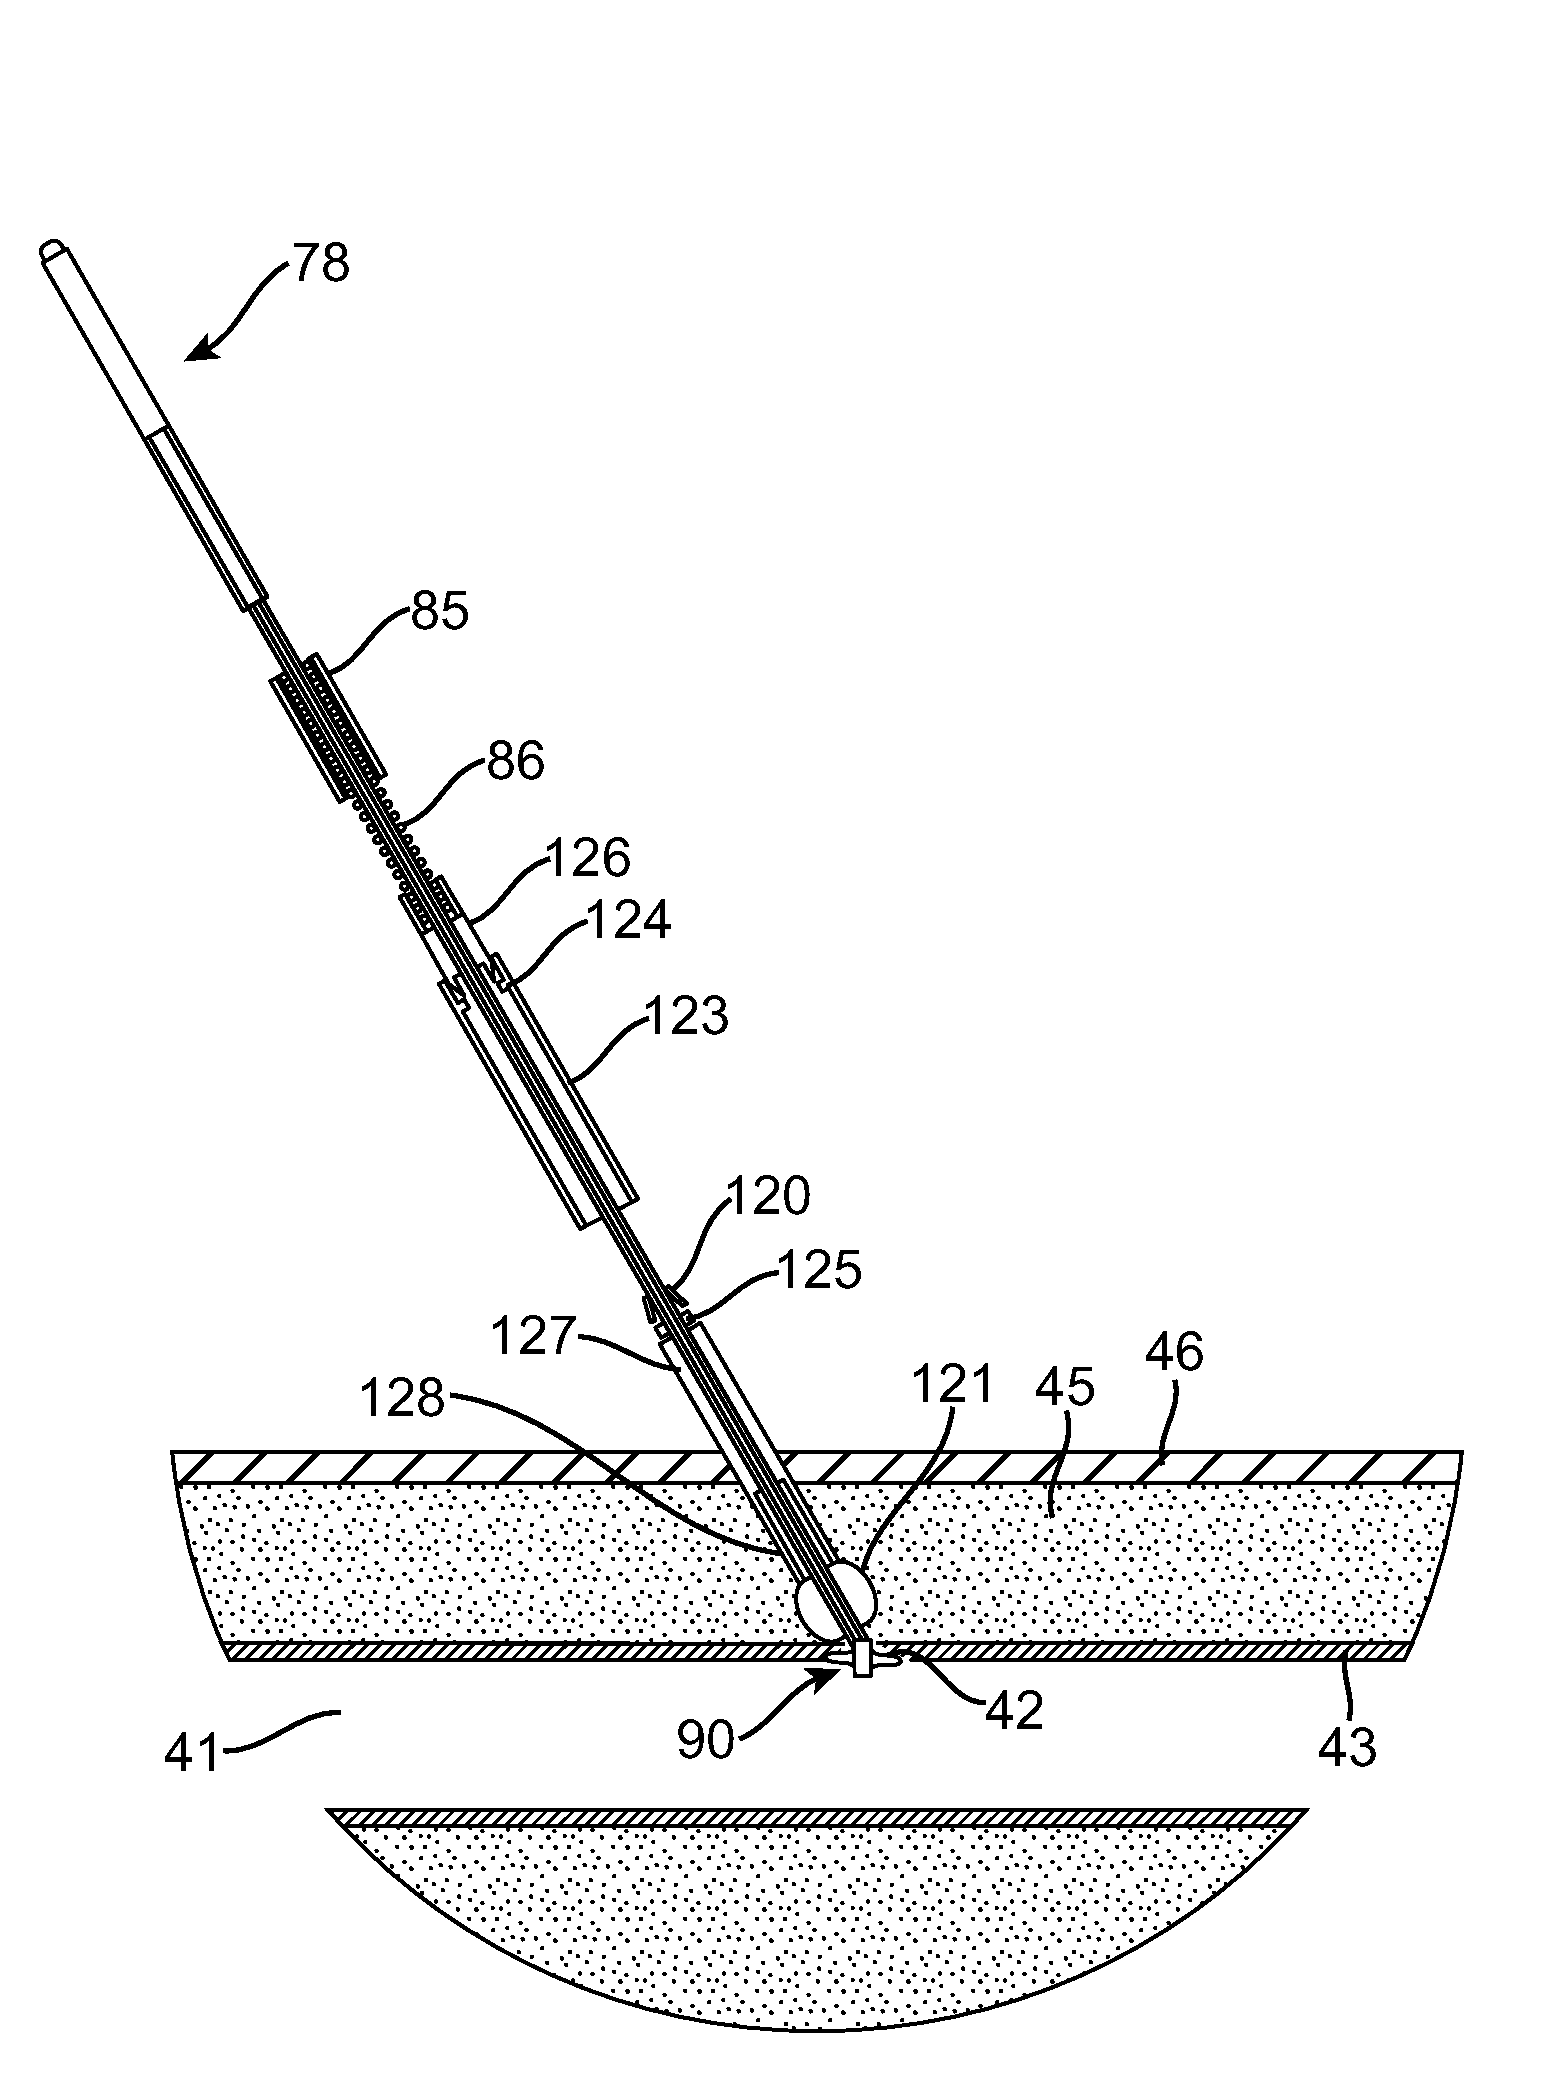 Apparatus and methods for delivering hemostatic materials for blood vessel closure